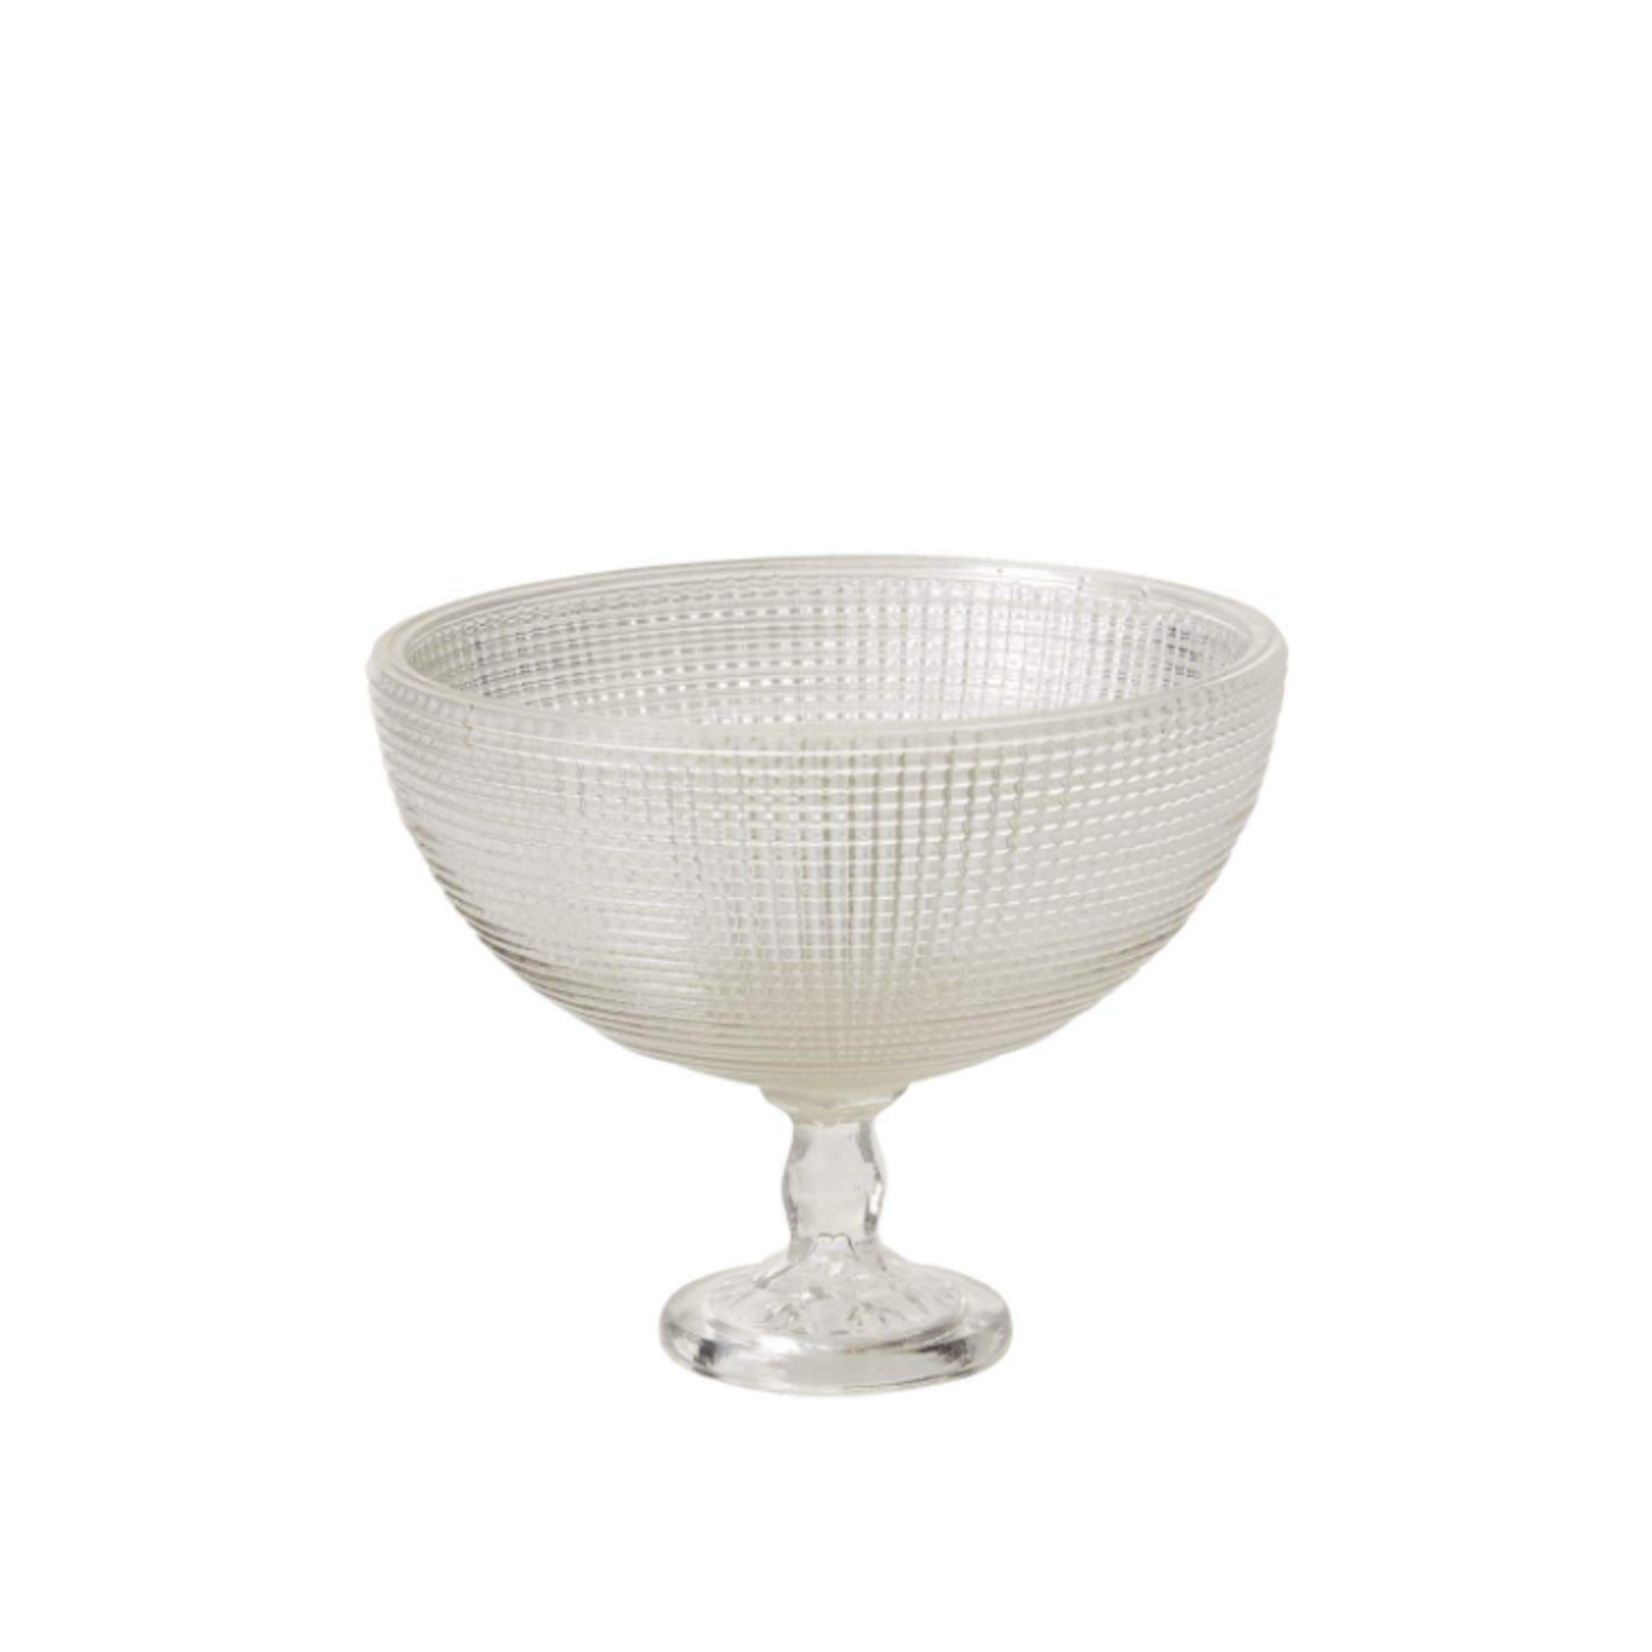 7.5”h x 8.75” CLEAR GLASS OPULENT COMPOTE